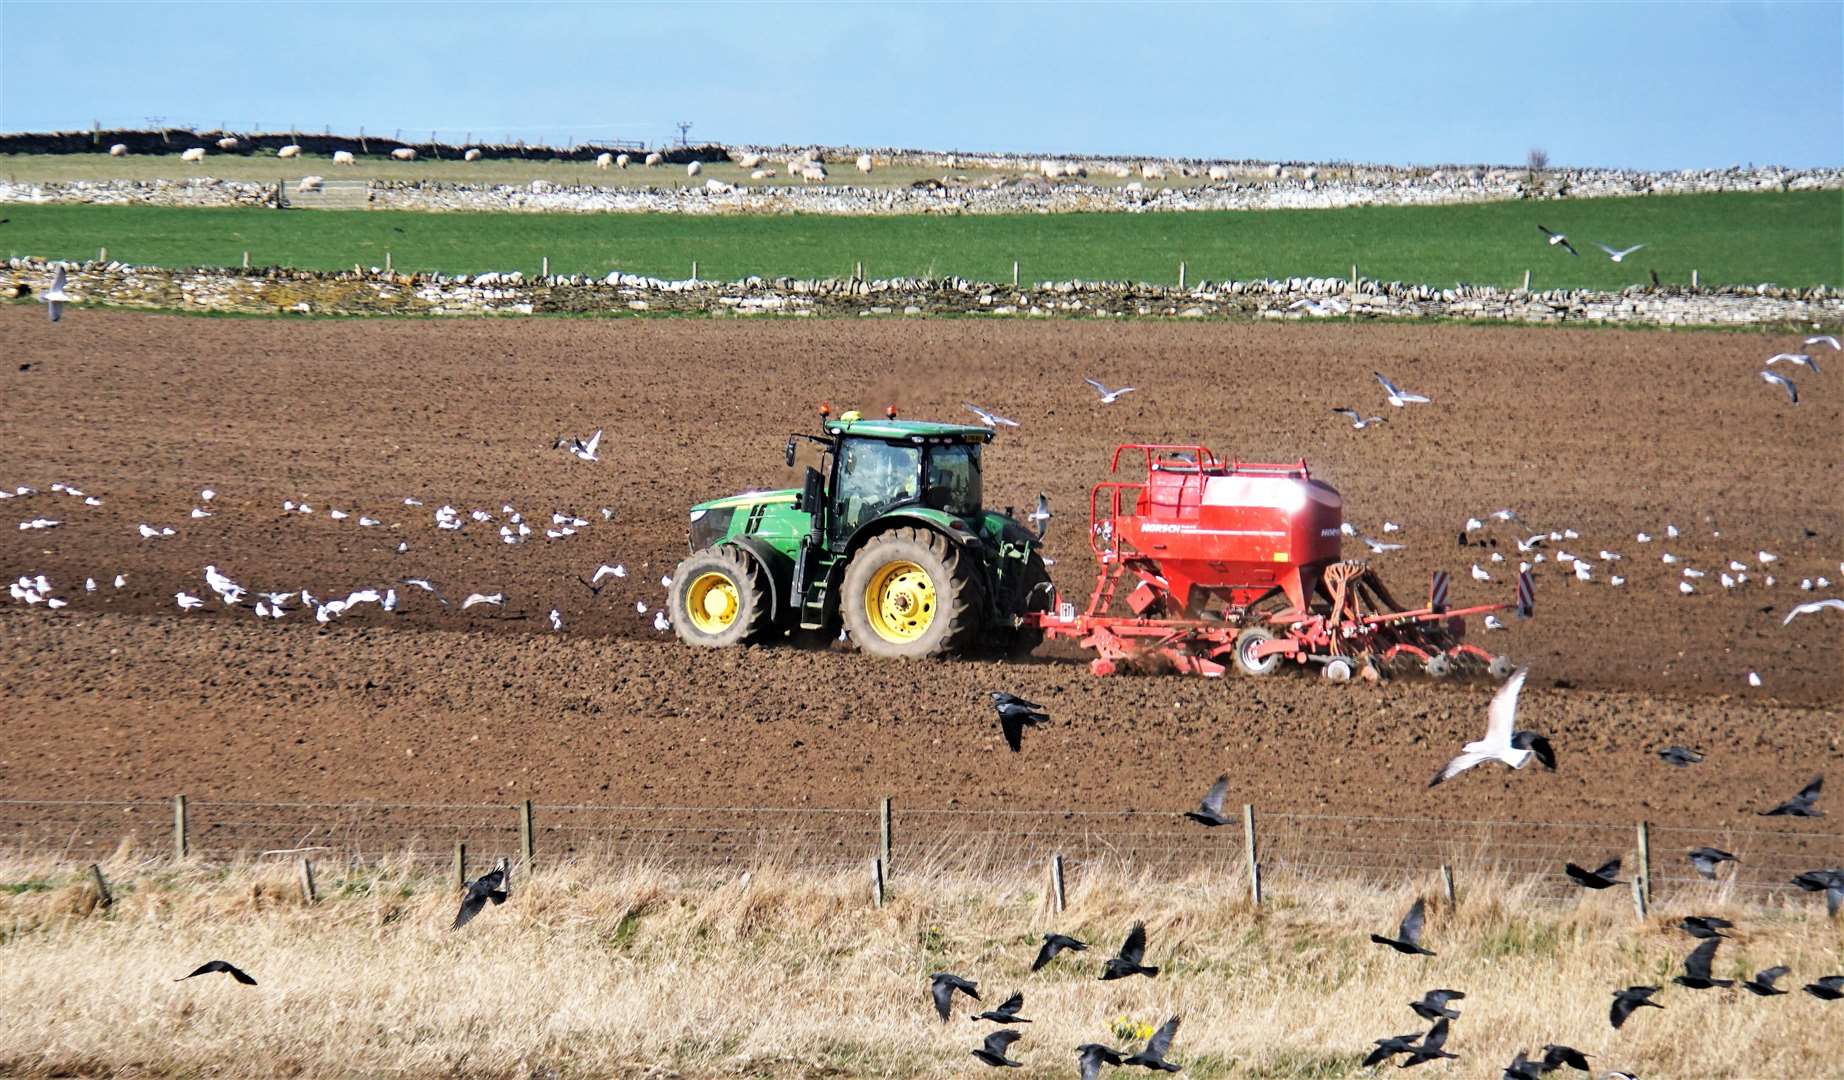 Gulls are commonly seen following tractors like this one at a farm near Wick. Picture: DGS